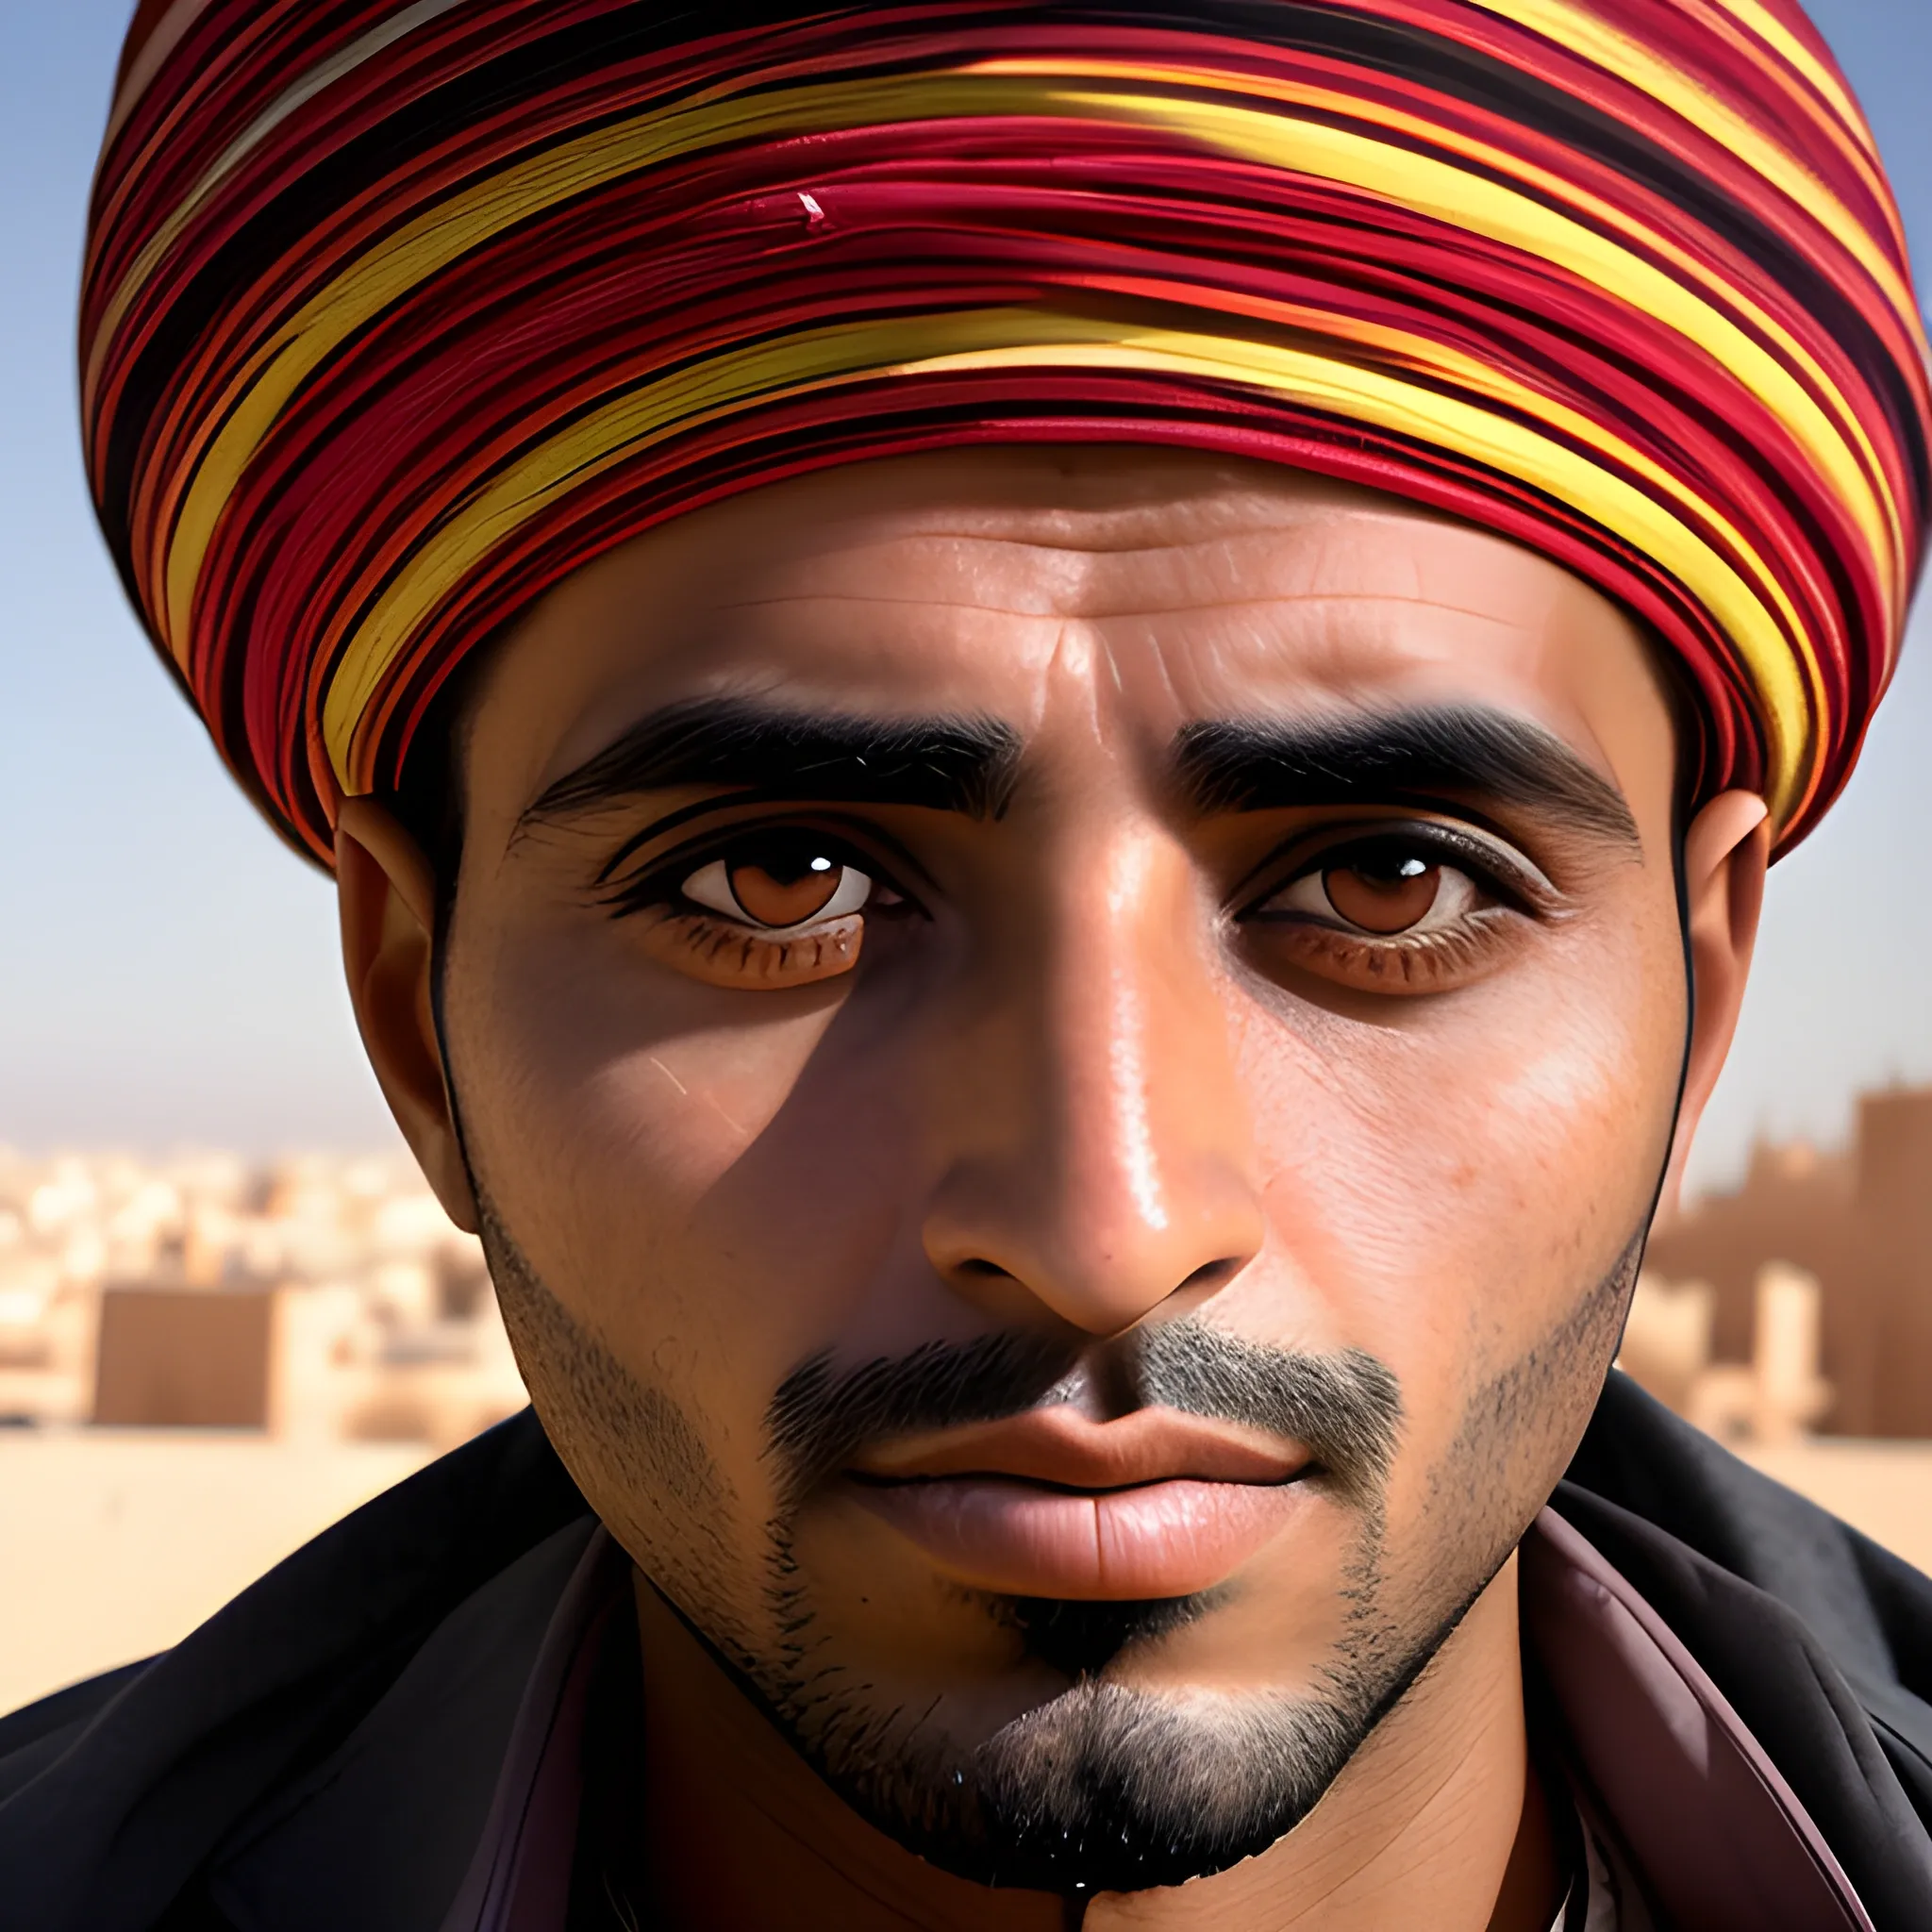 Moroccan 30 years old man, big eyes, extreme picture quality, ambient light, exquisite facial features, 3D